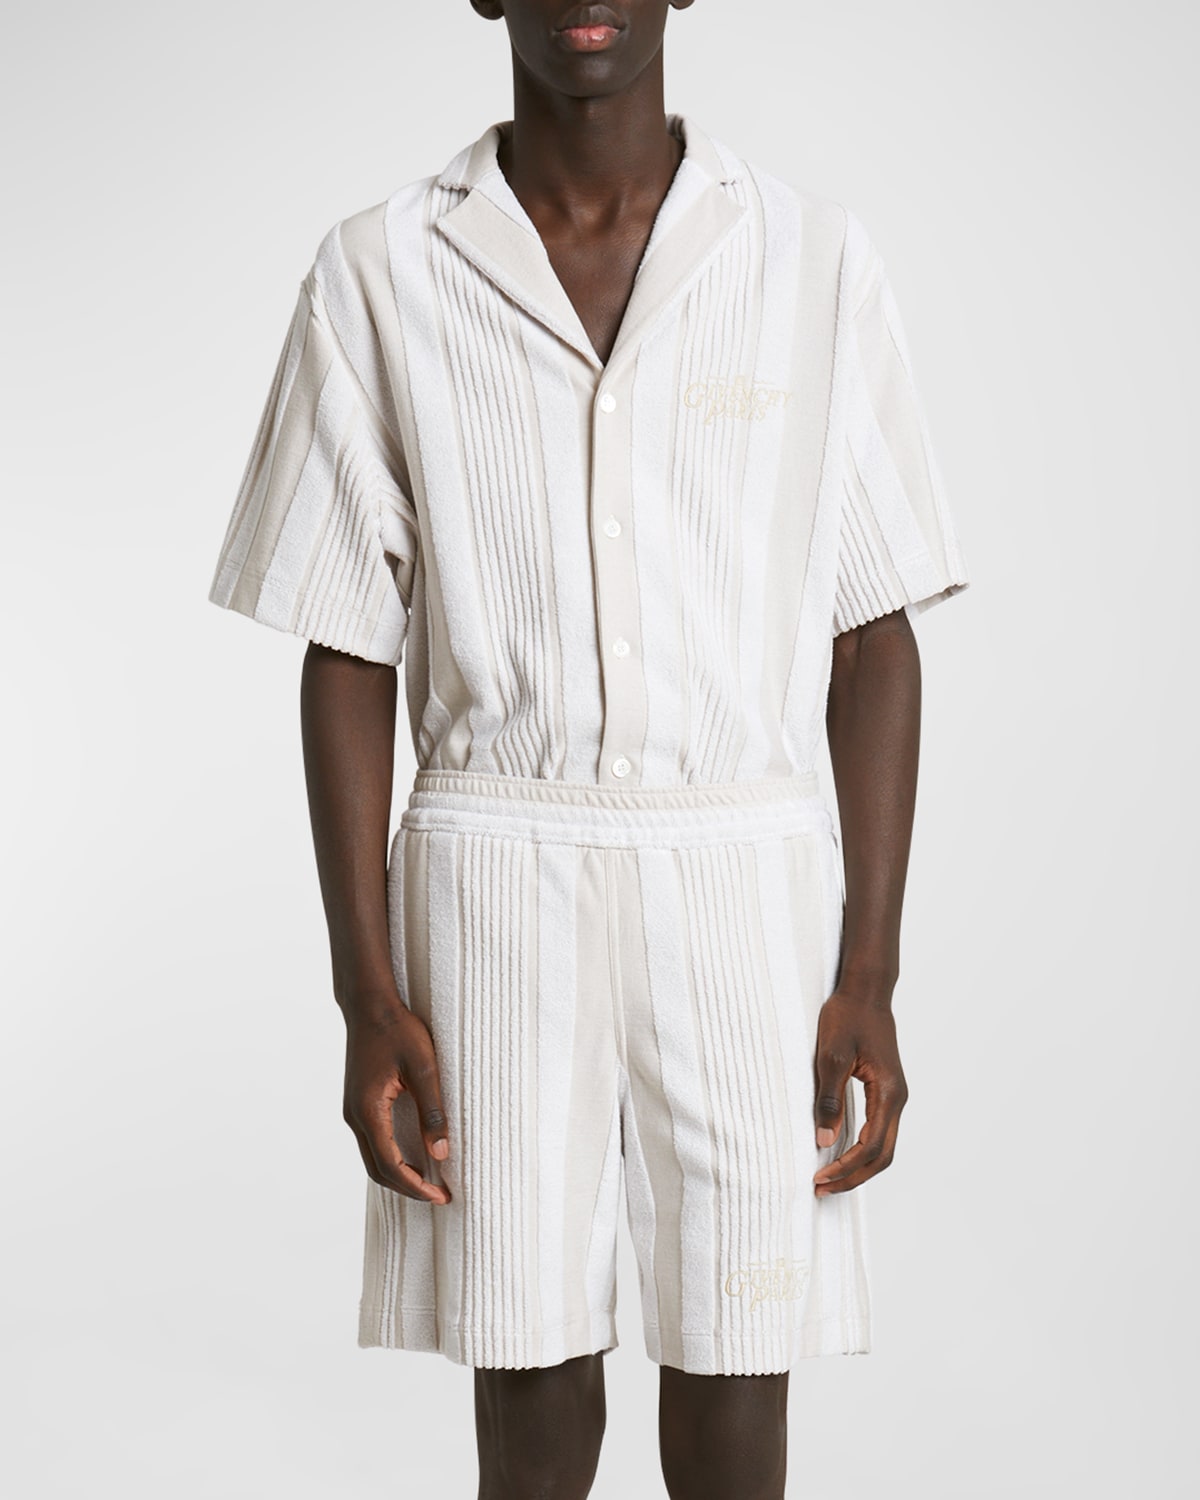 Givenchy Men's Vertical Stripe Cotton Toweling Shorts In White